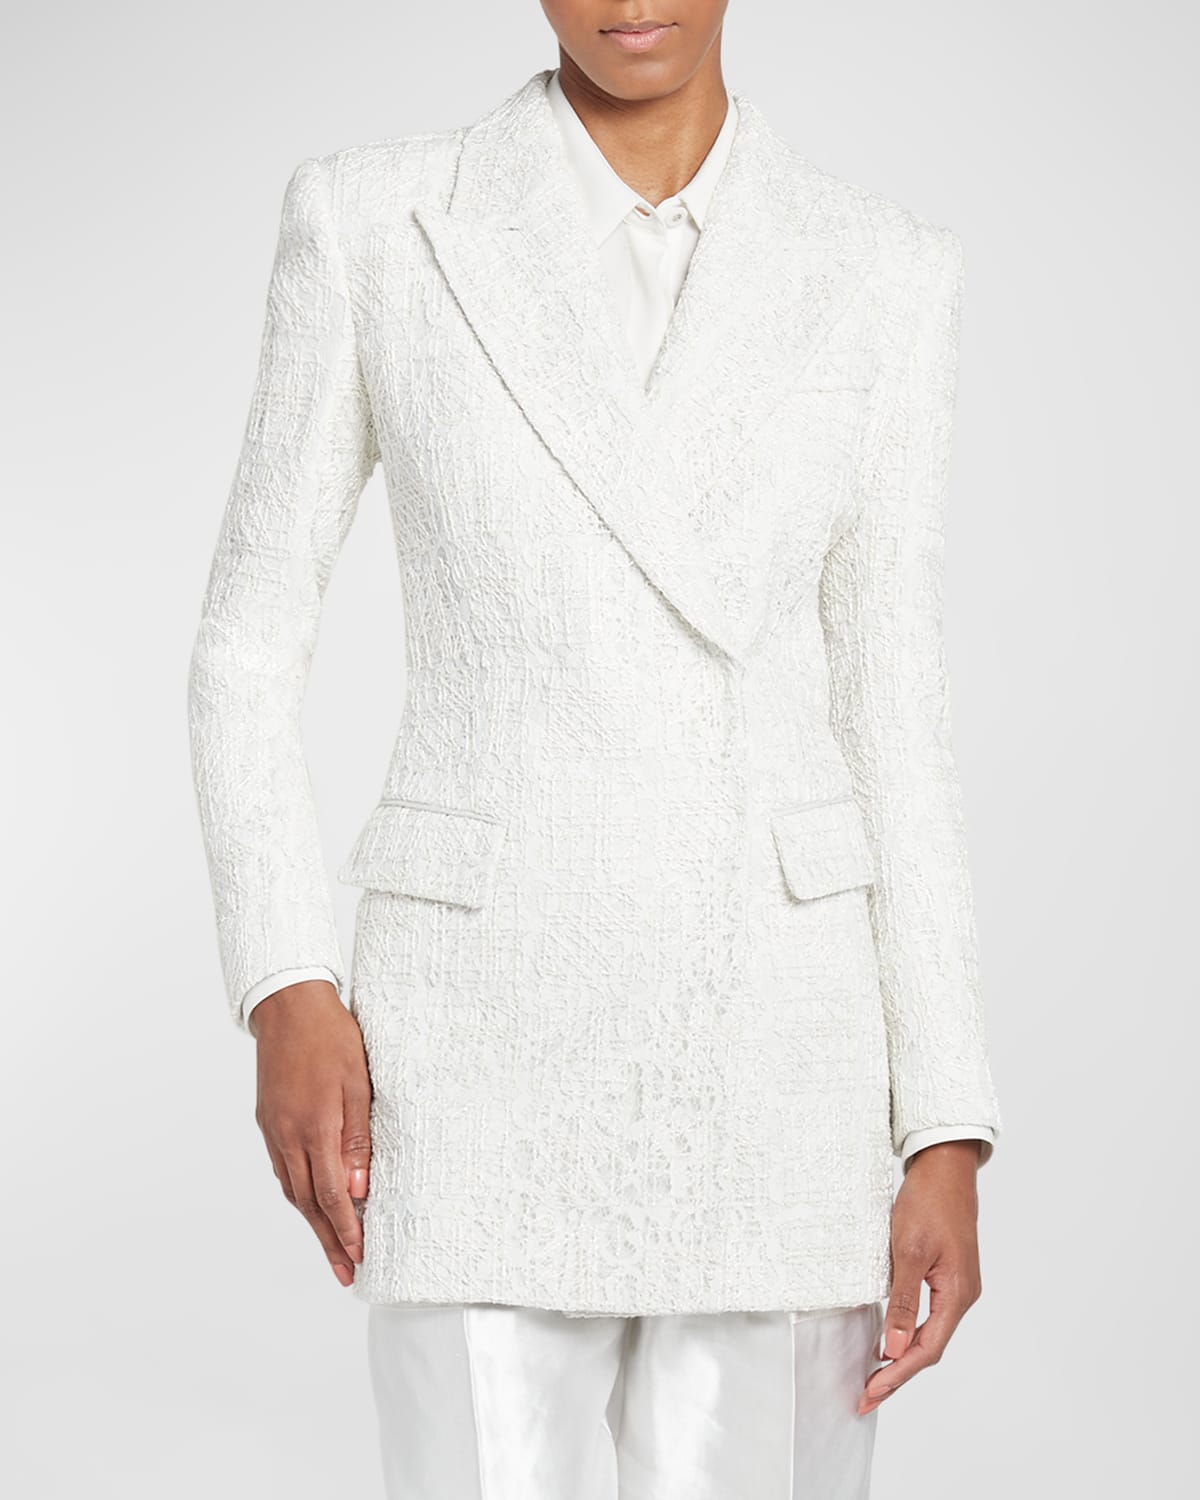 Shop Giorgio Armani Broderie Cordonnet Lace Tailored Jacket In Solid White